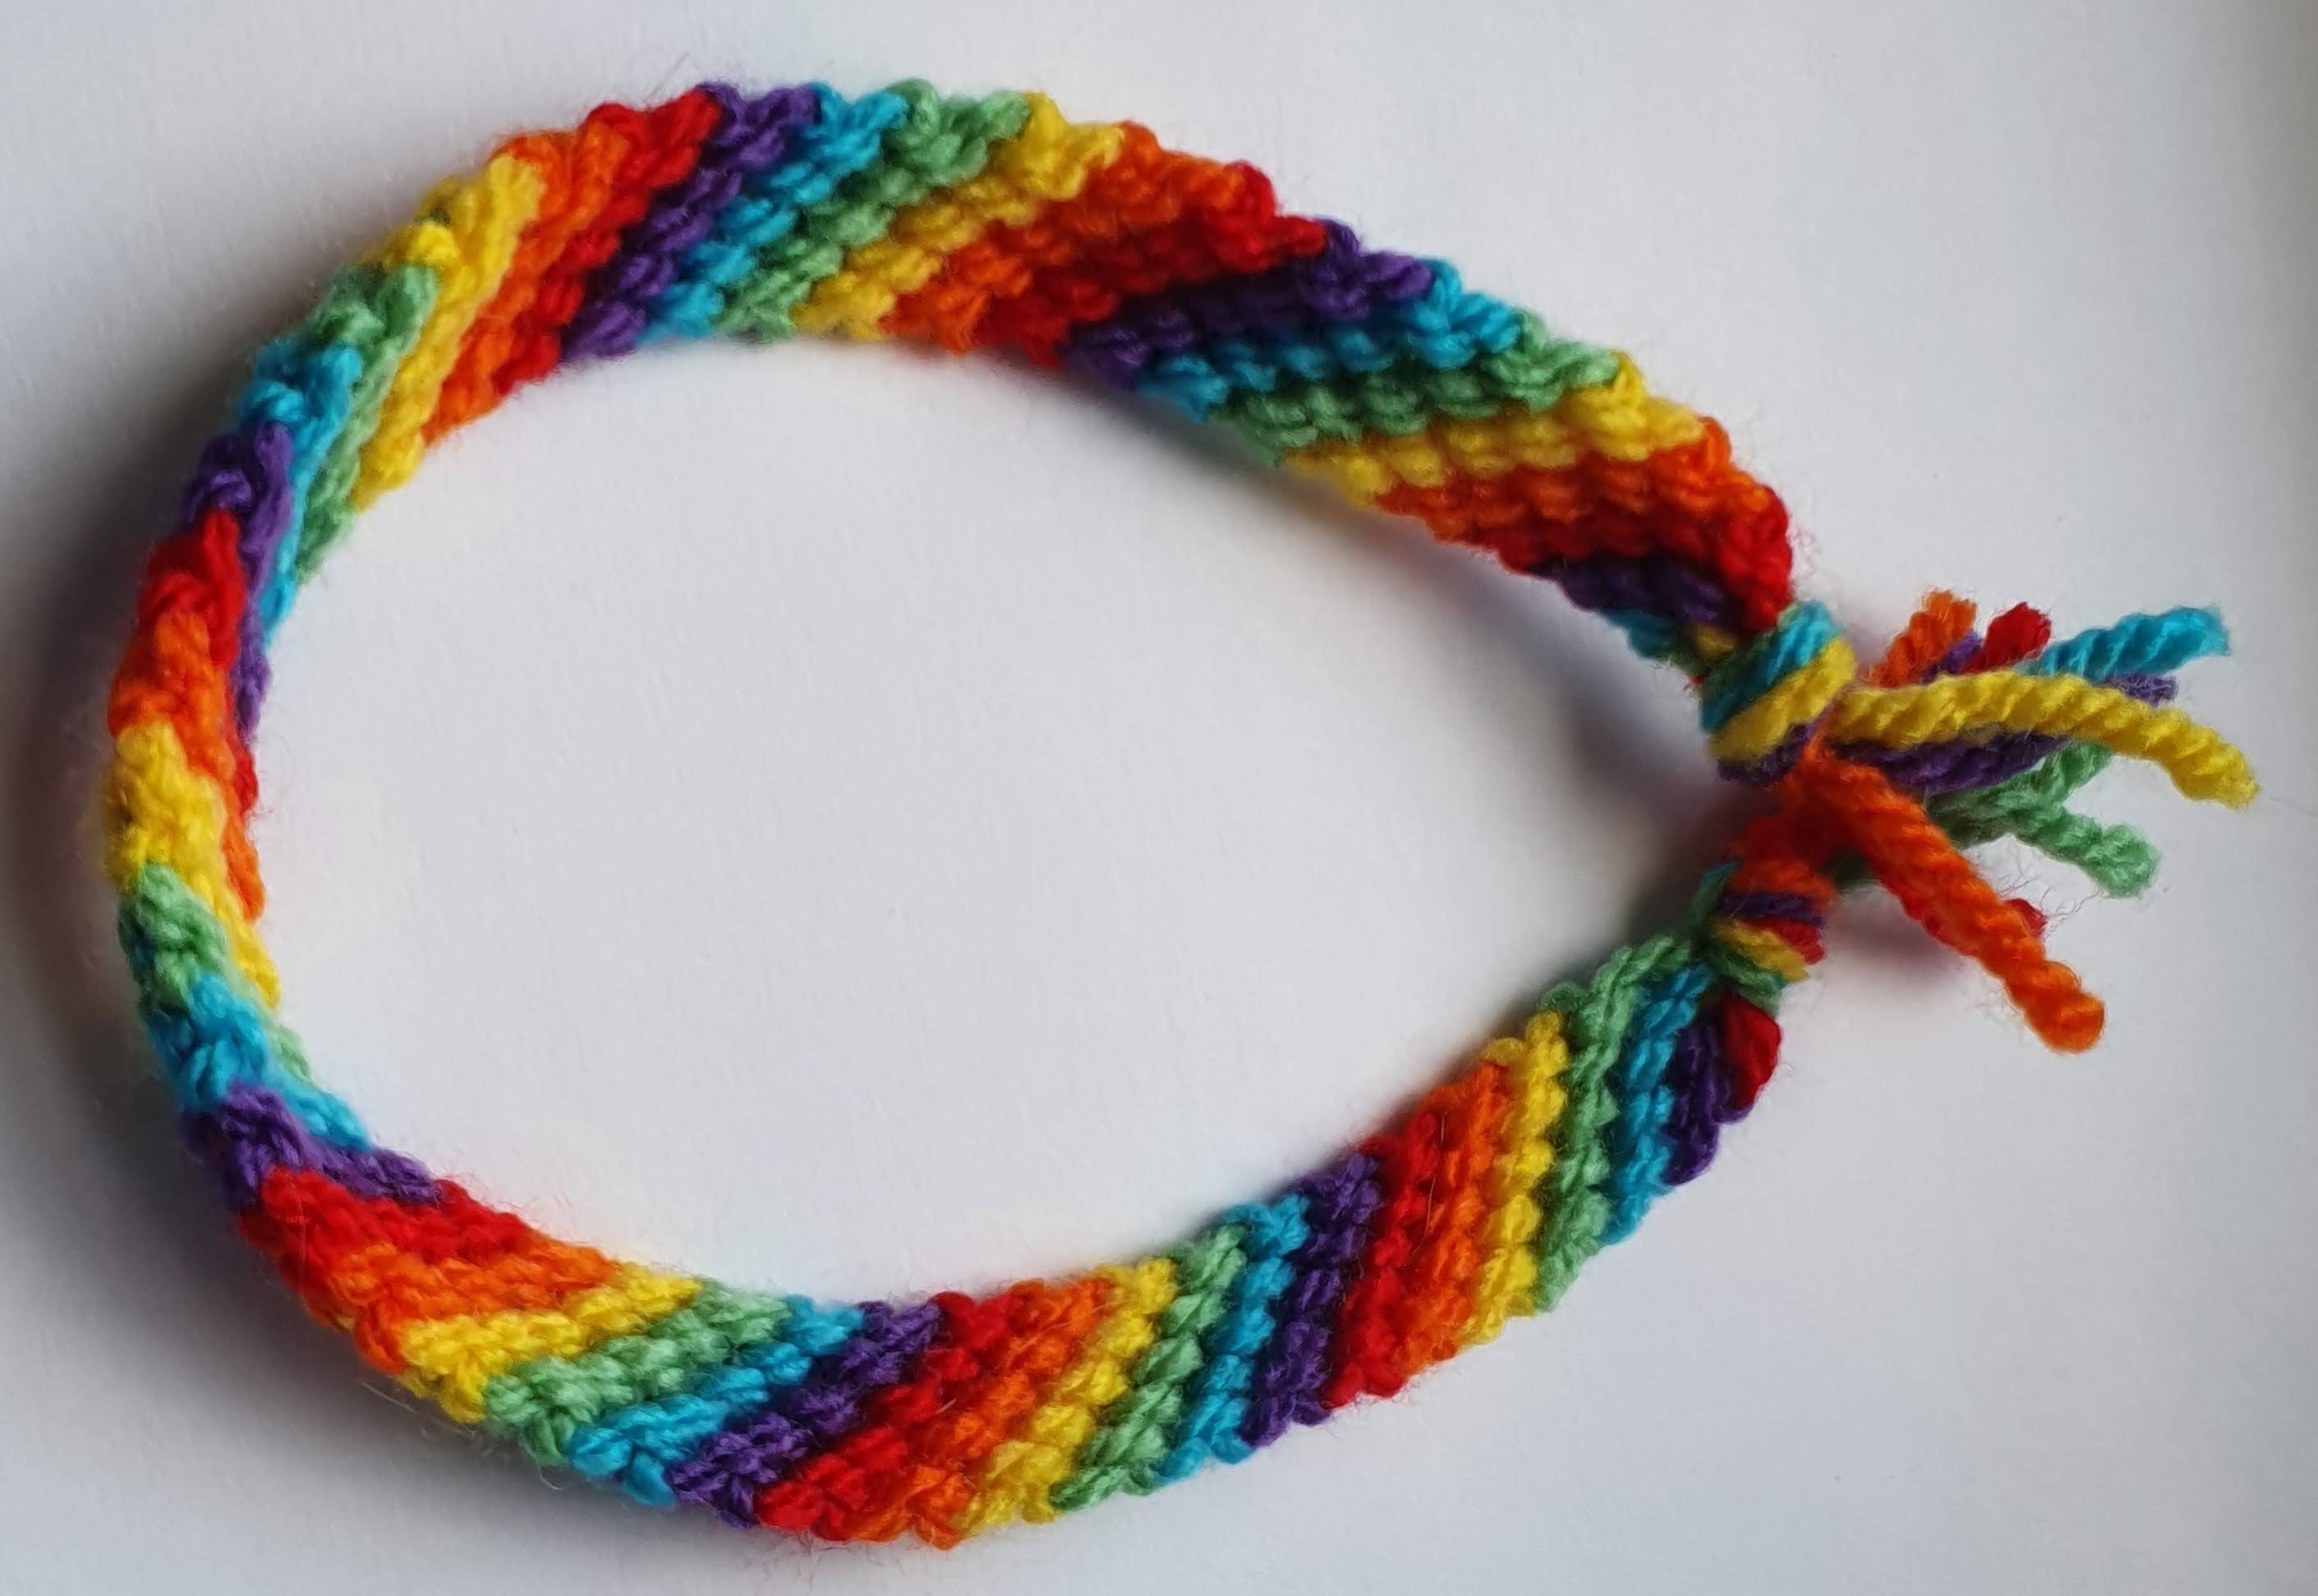 Curled up bracelet with rainbow diagonal stripes